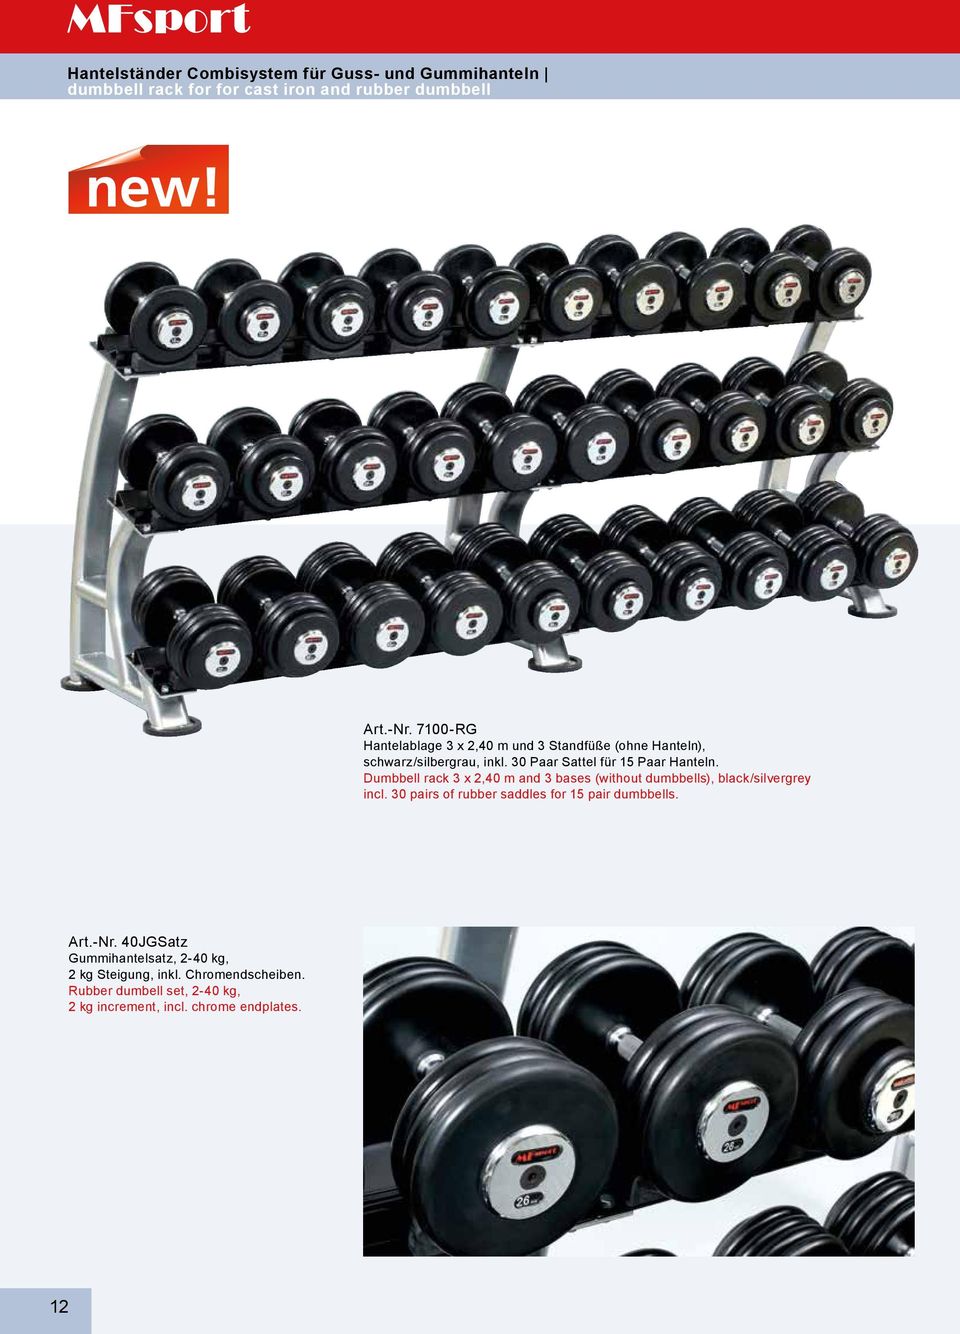 Dumbbell rack 3 x 2,40 m and 3 bases (without dumbbells), black/silvergrey incl. 30 pairs of rubber saddles for 15 pair dumbbells.